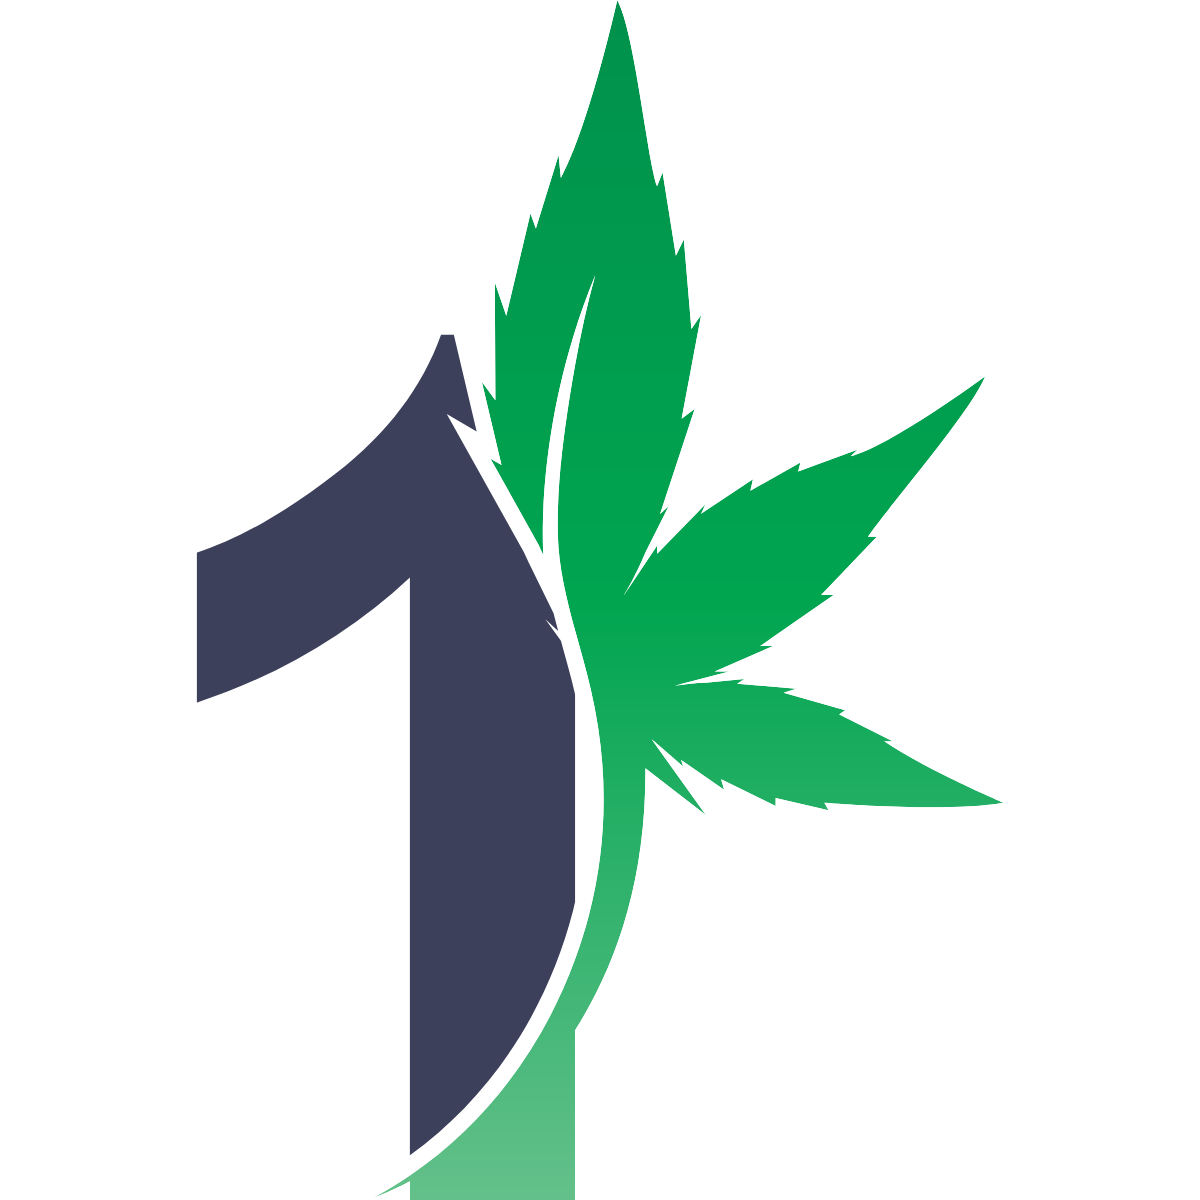 The number one fused with a cannabis leaf